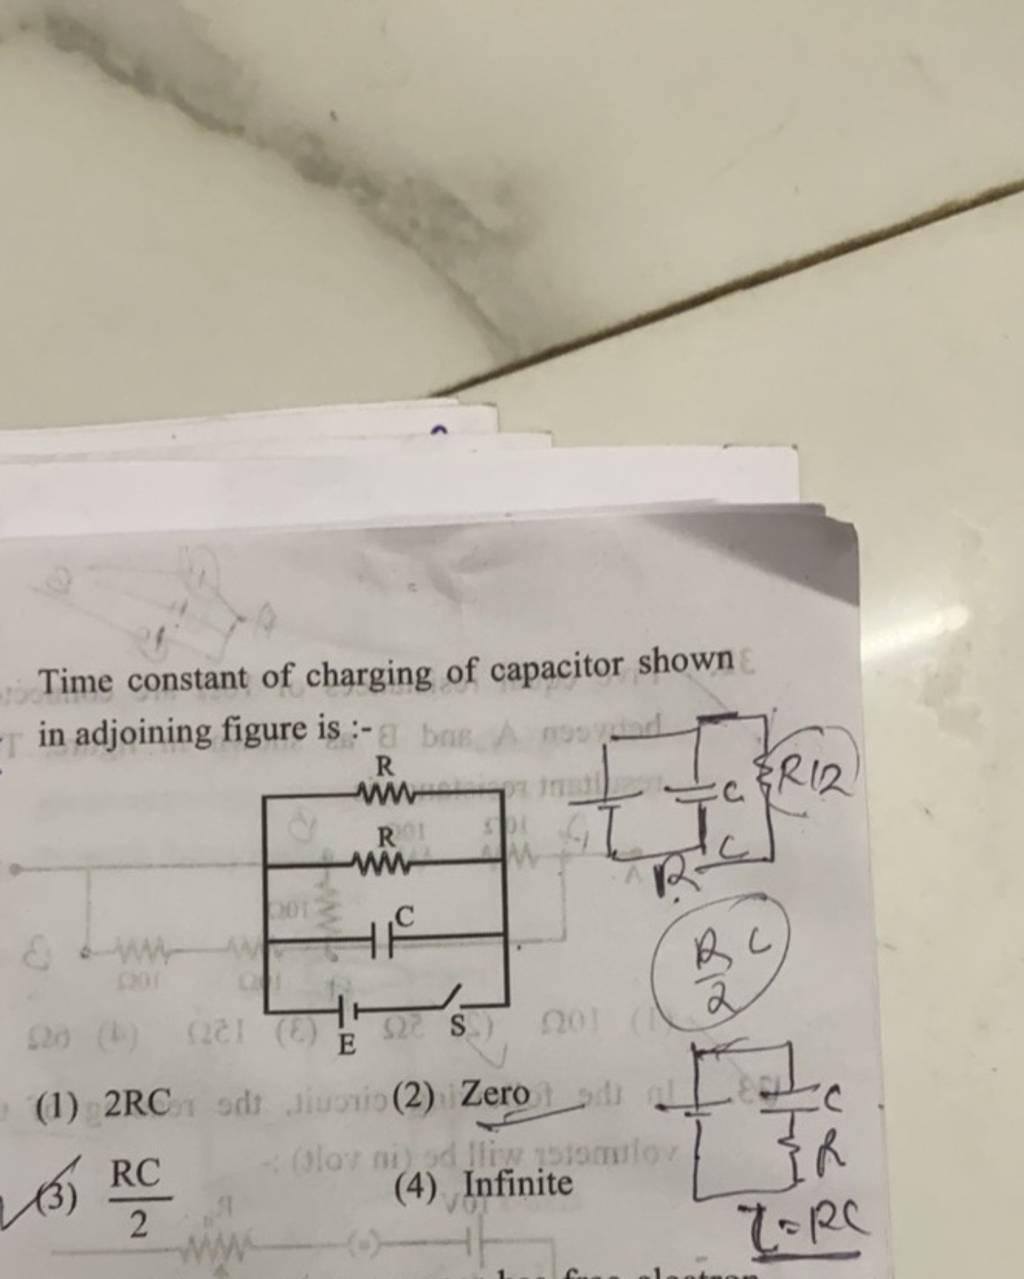 Time Constant Of Charging Of Capacitor Shown In Adjoining Figure Is 6061